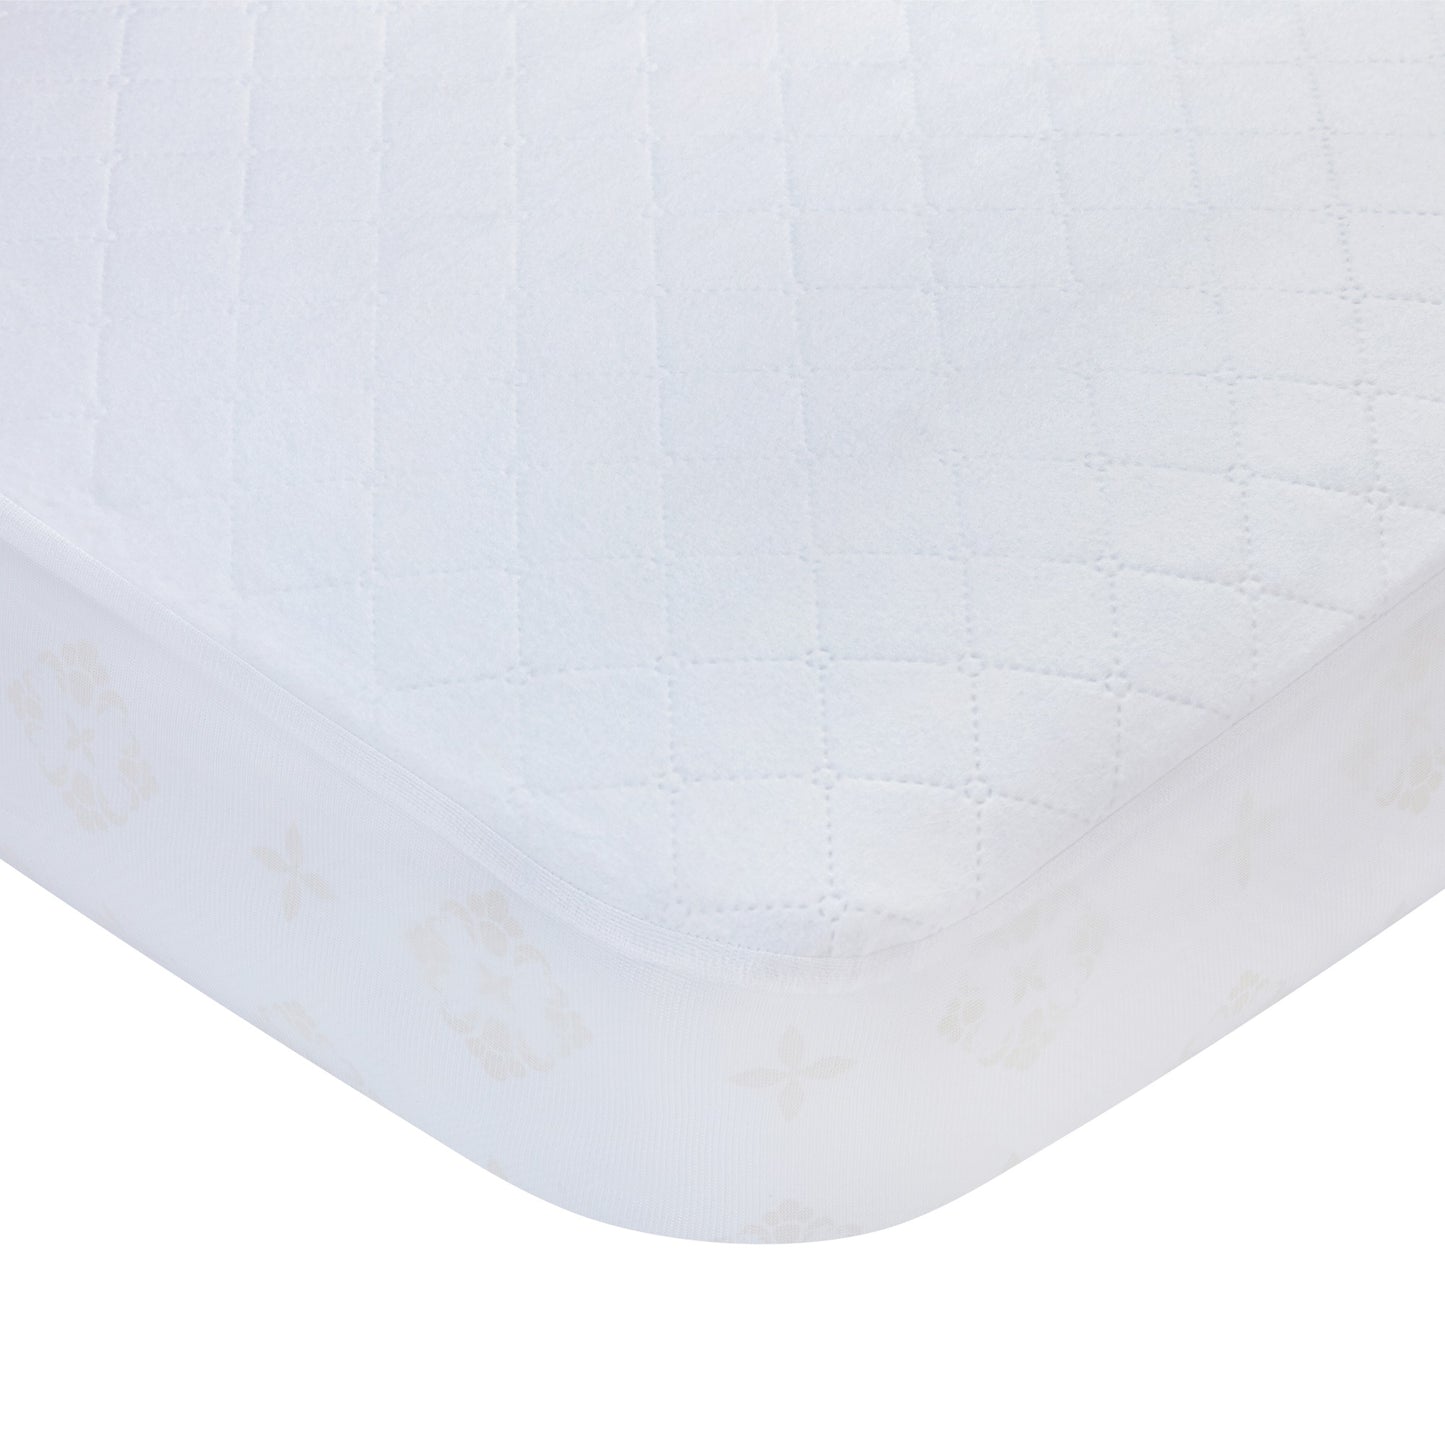 Carter's Waterproof Fitted Crib/Toddler Mattress Pad